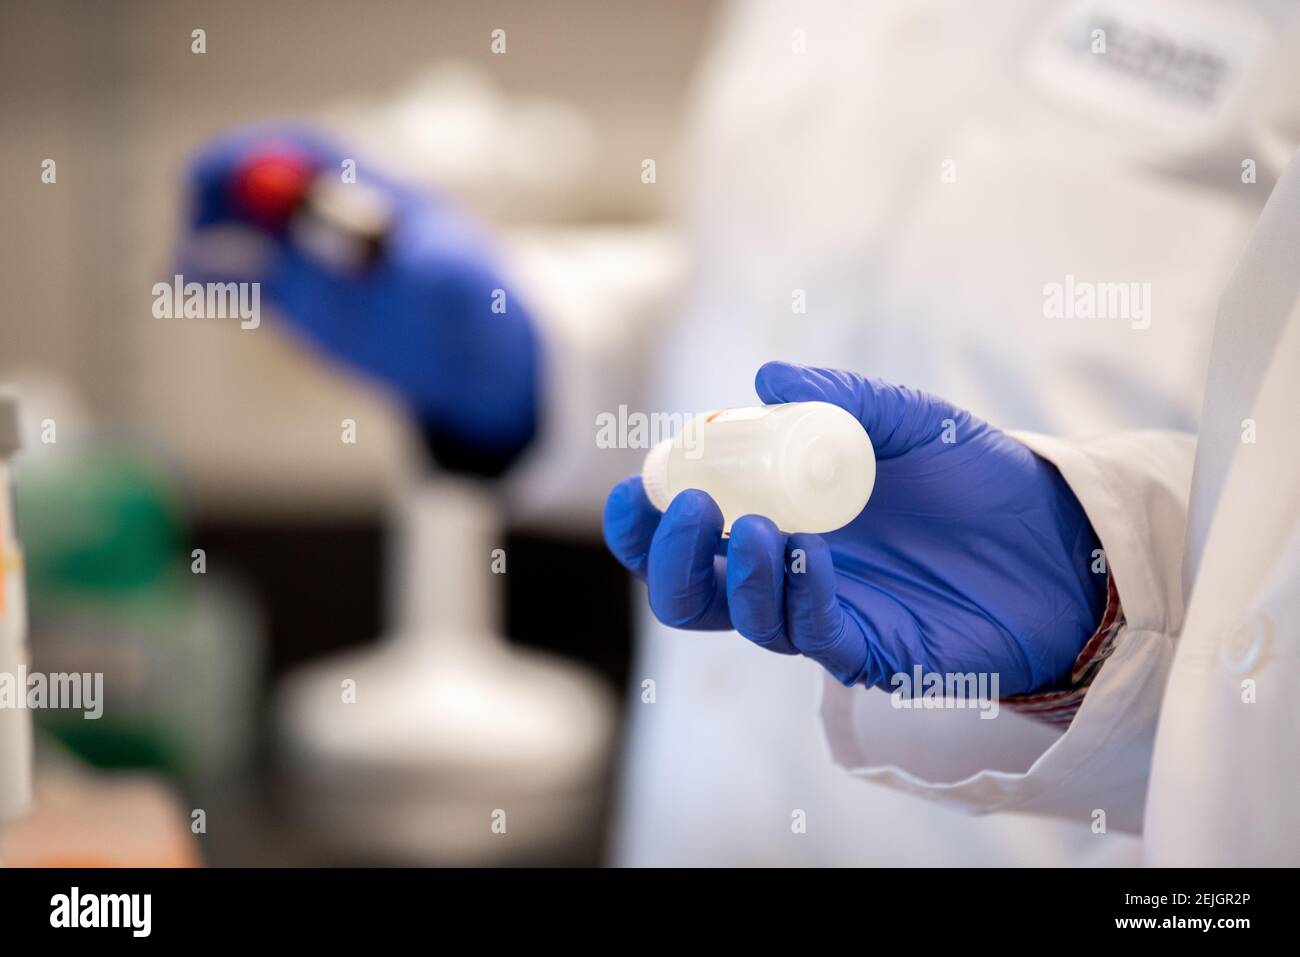 Aldatu Biosciences in Watertown, has developed a rapid test for COVID-19 detection called PANDAA qDx™ SARS-CoV-2 being used in Boston. Stock Photo